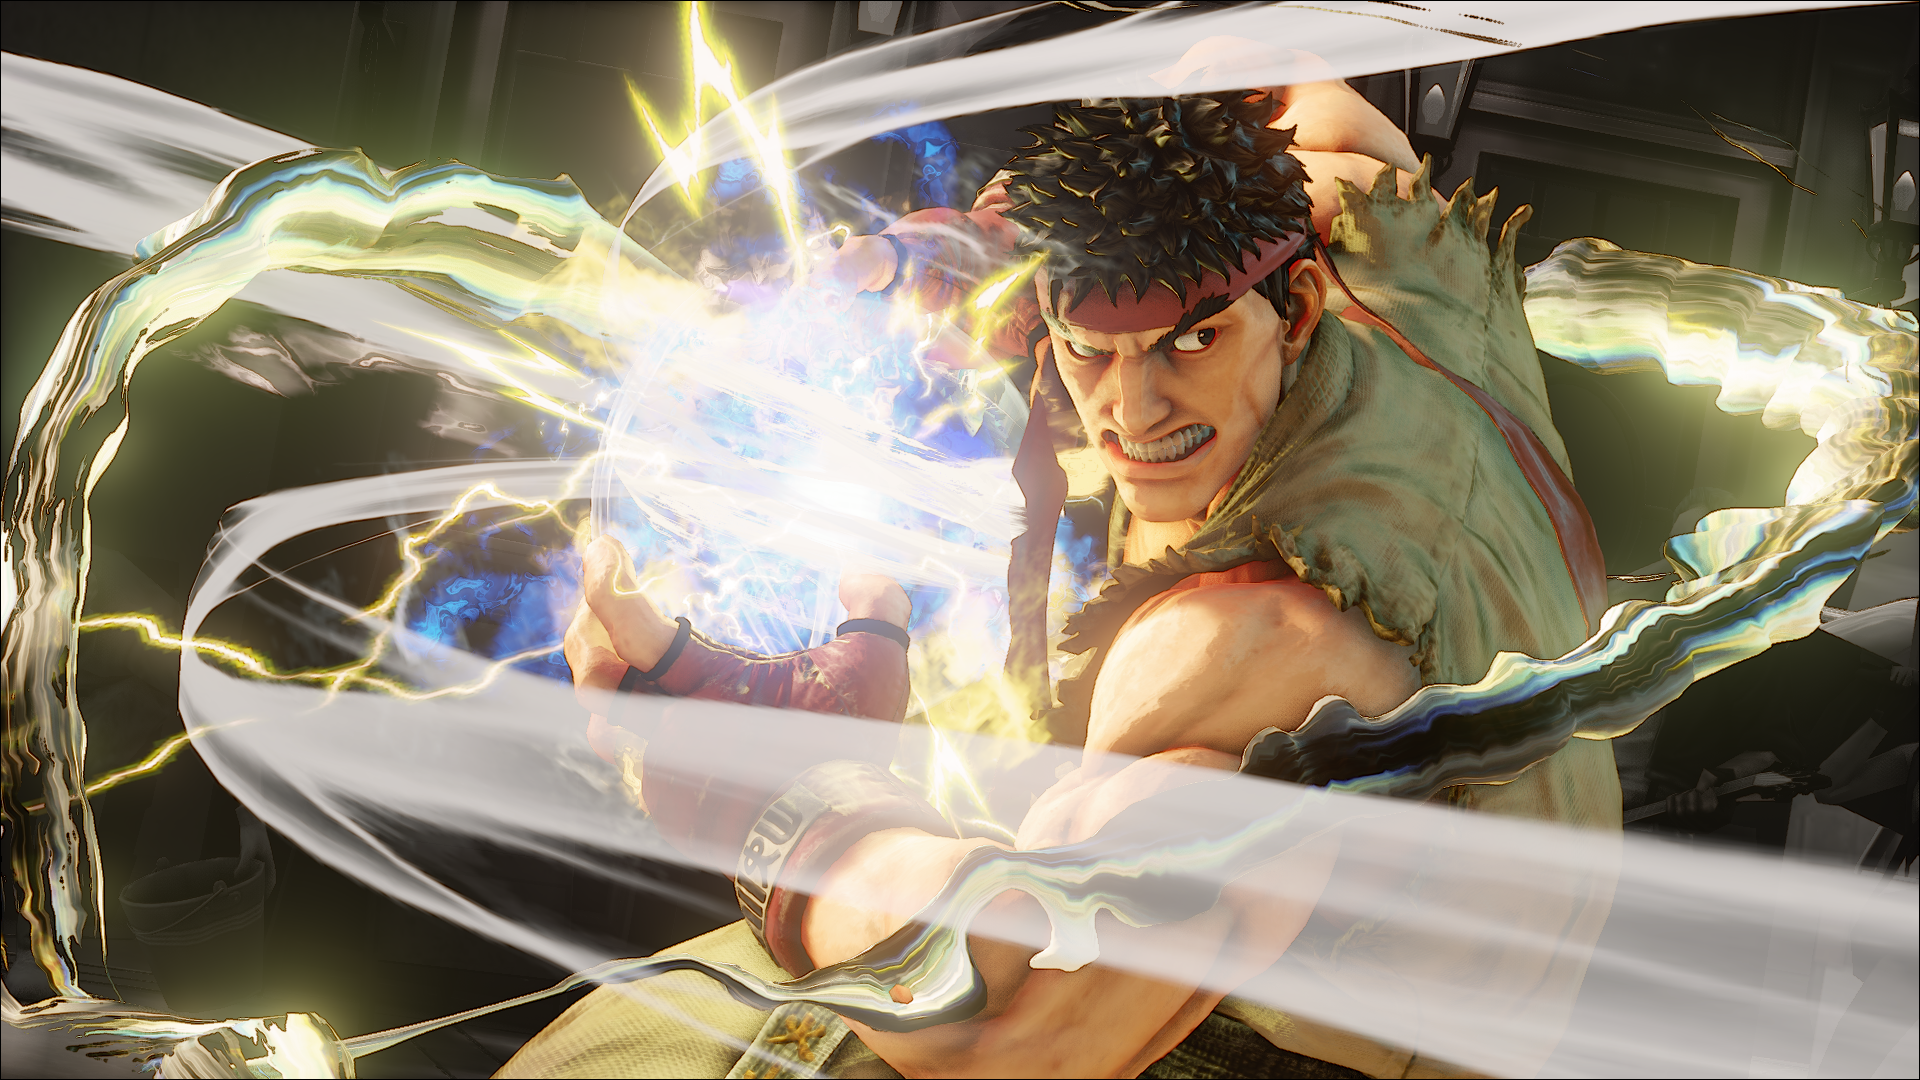 Media asset in full size related to 3dfxzone.it news item entitled as follows: La beta di Street Fighter V sar disponibile sia per PS4 che per PC | Image Name: news22771_Street-Fighter-V-screenshot_1.png